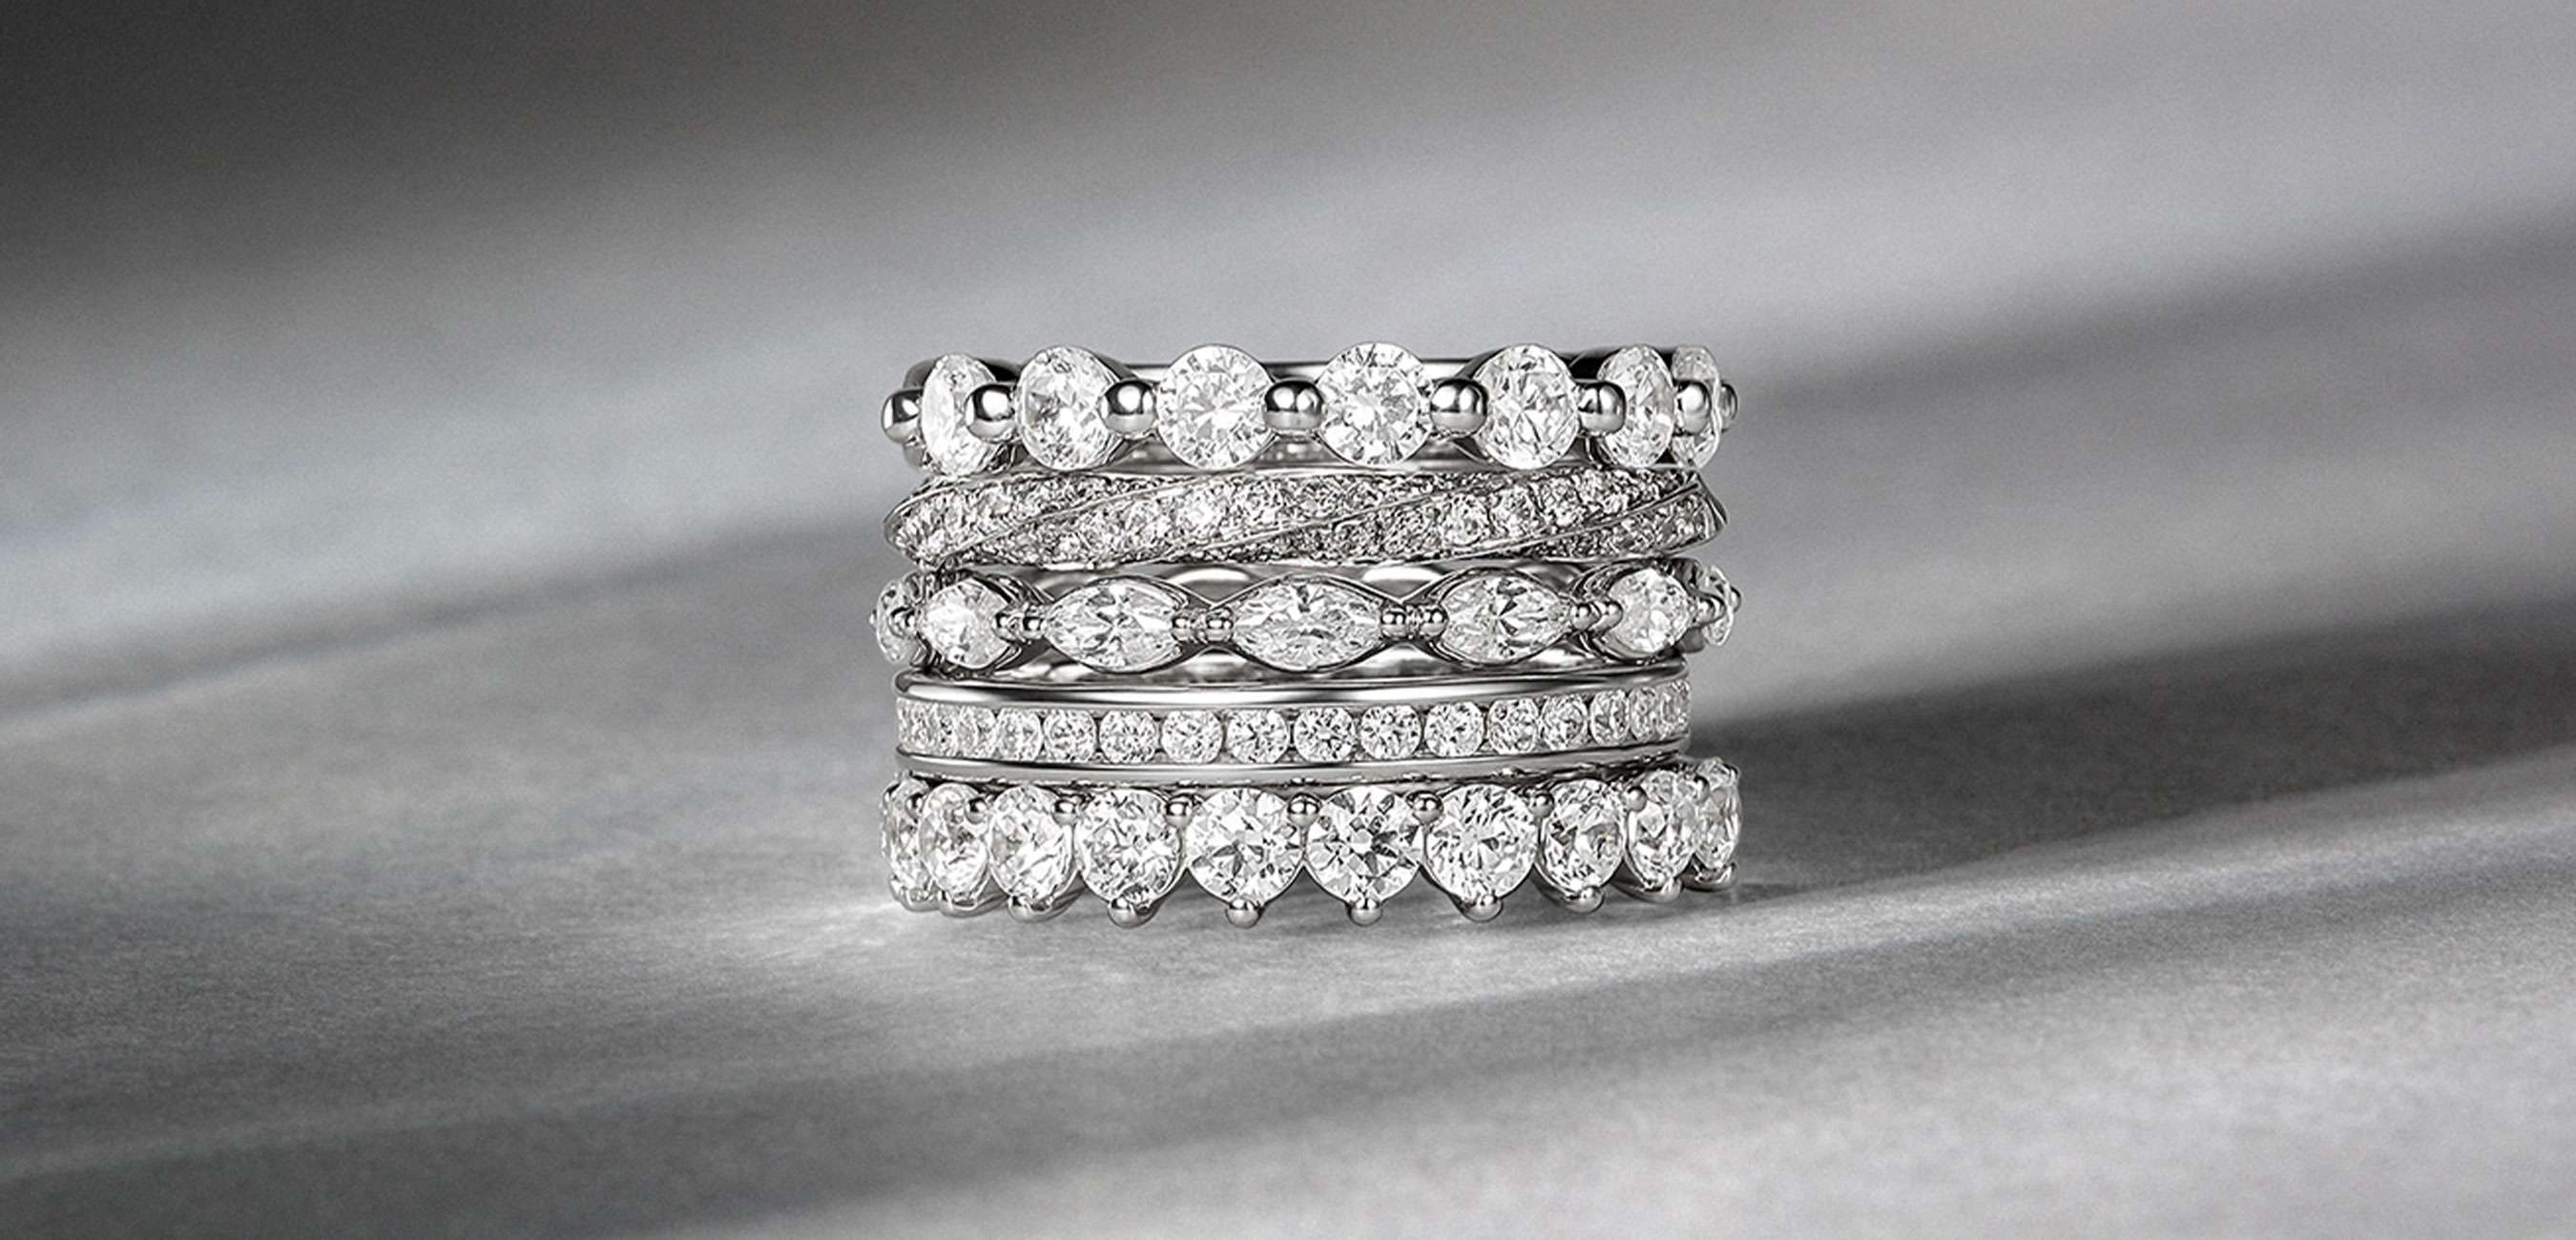 Stackable Engagement Rings, Stackable Diamond wedding Bands - A.JAFFE